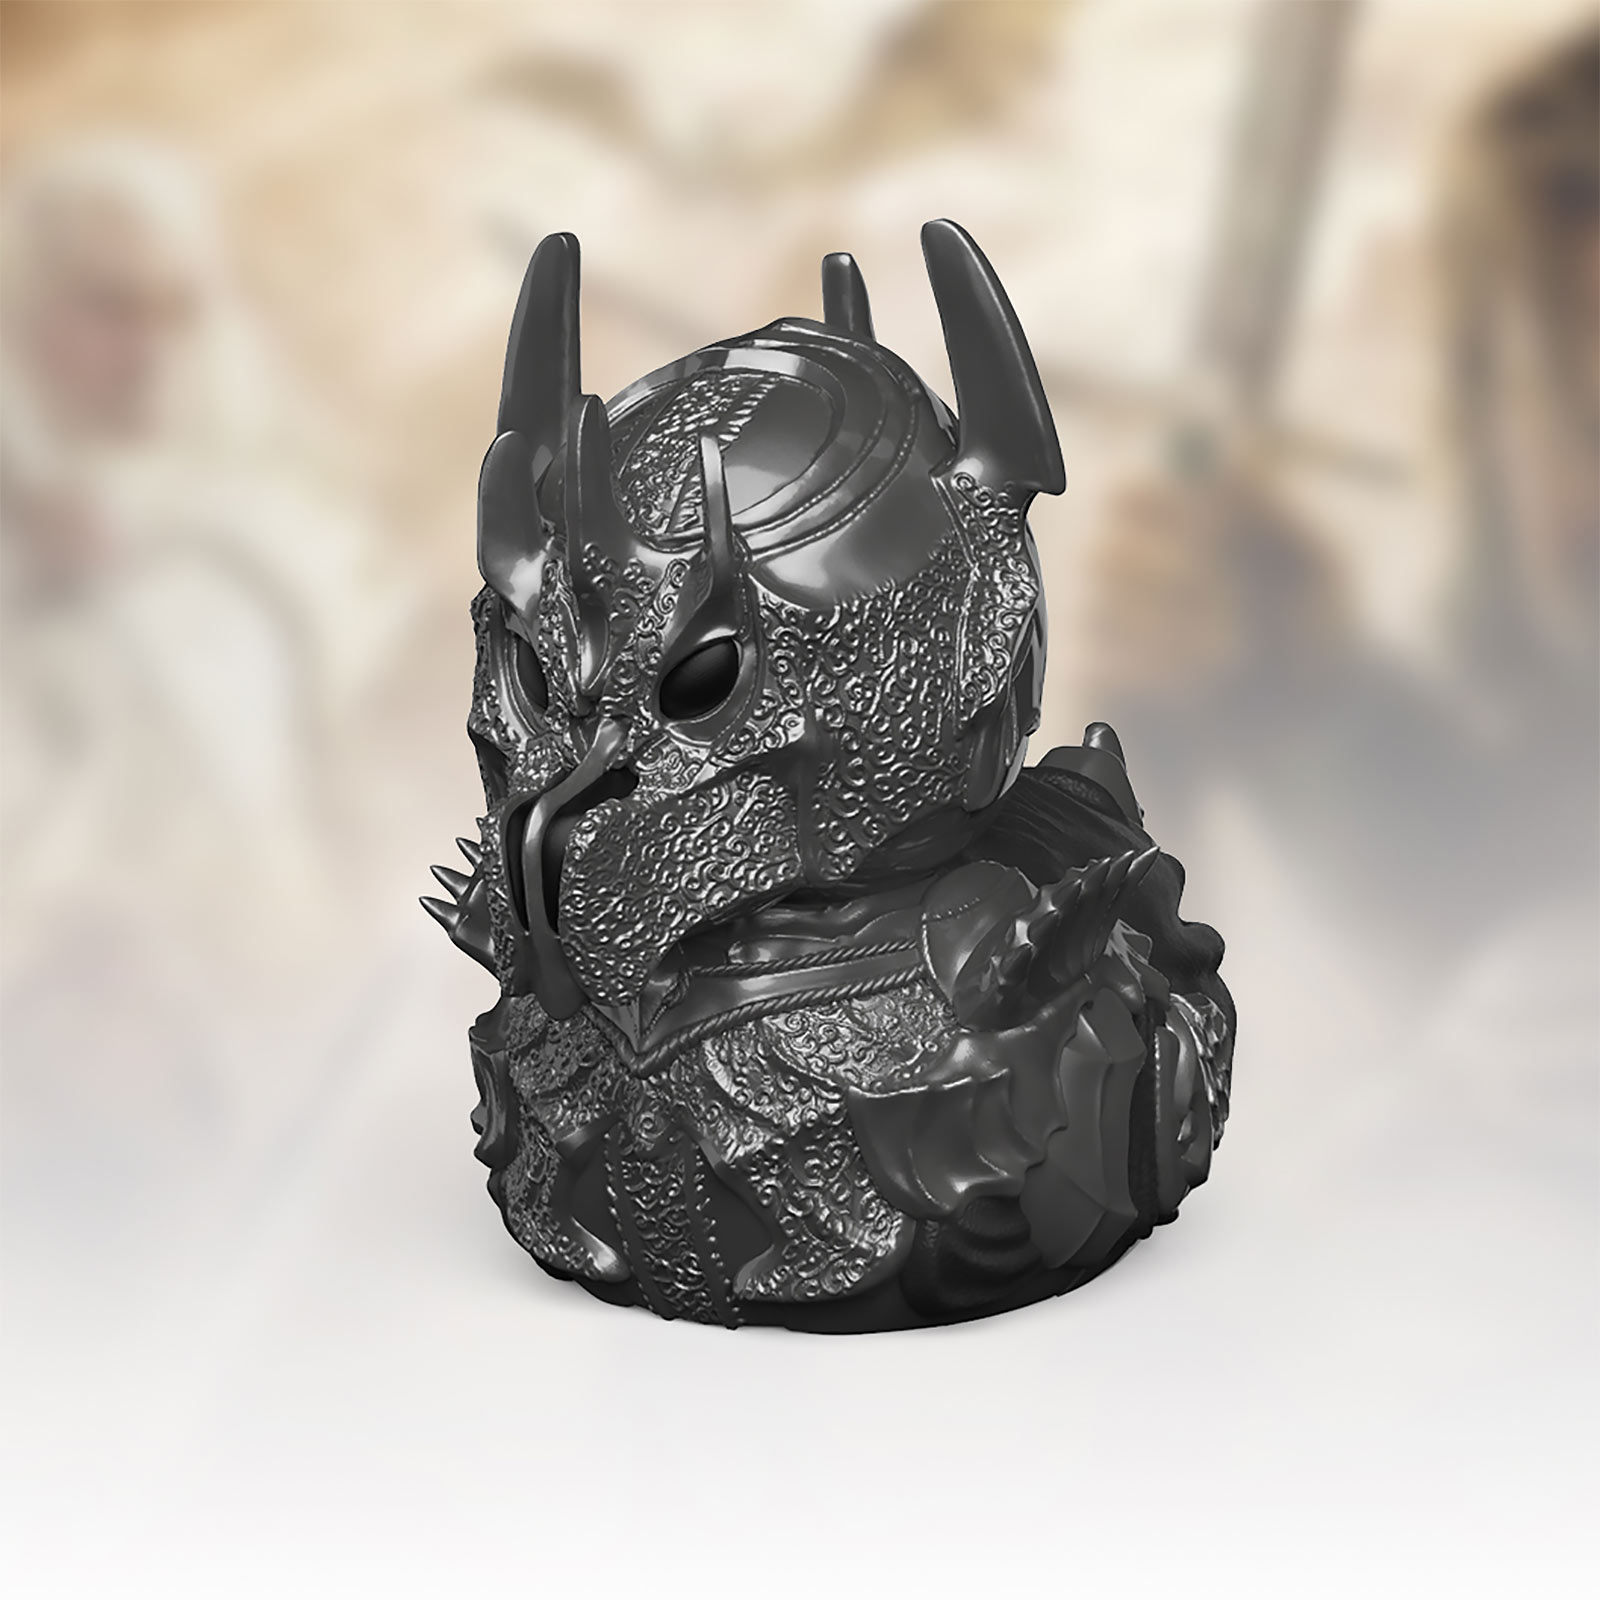 Lord of the Rings - Sauron TUBBZ Decorative Duck